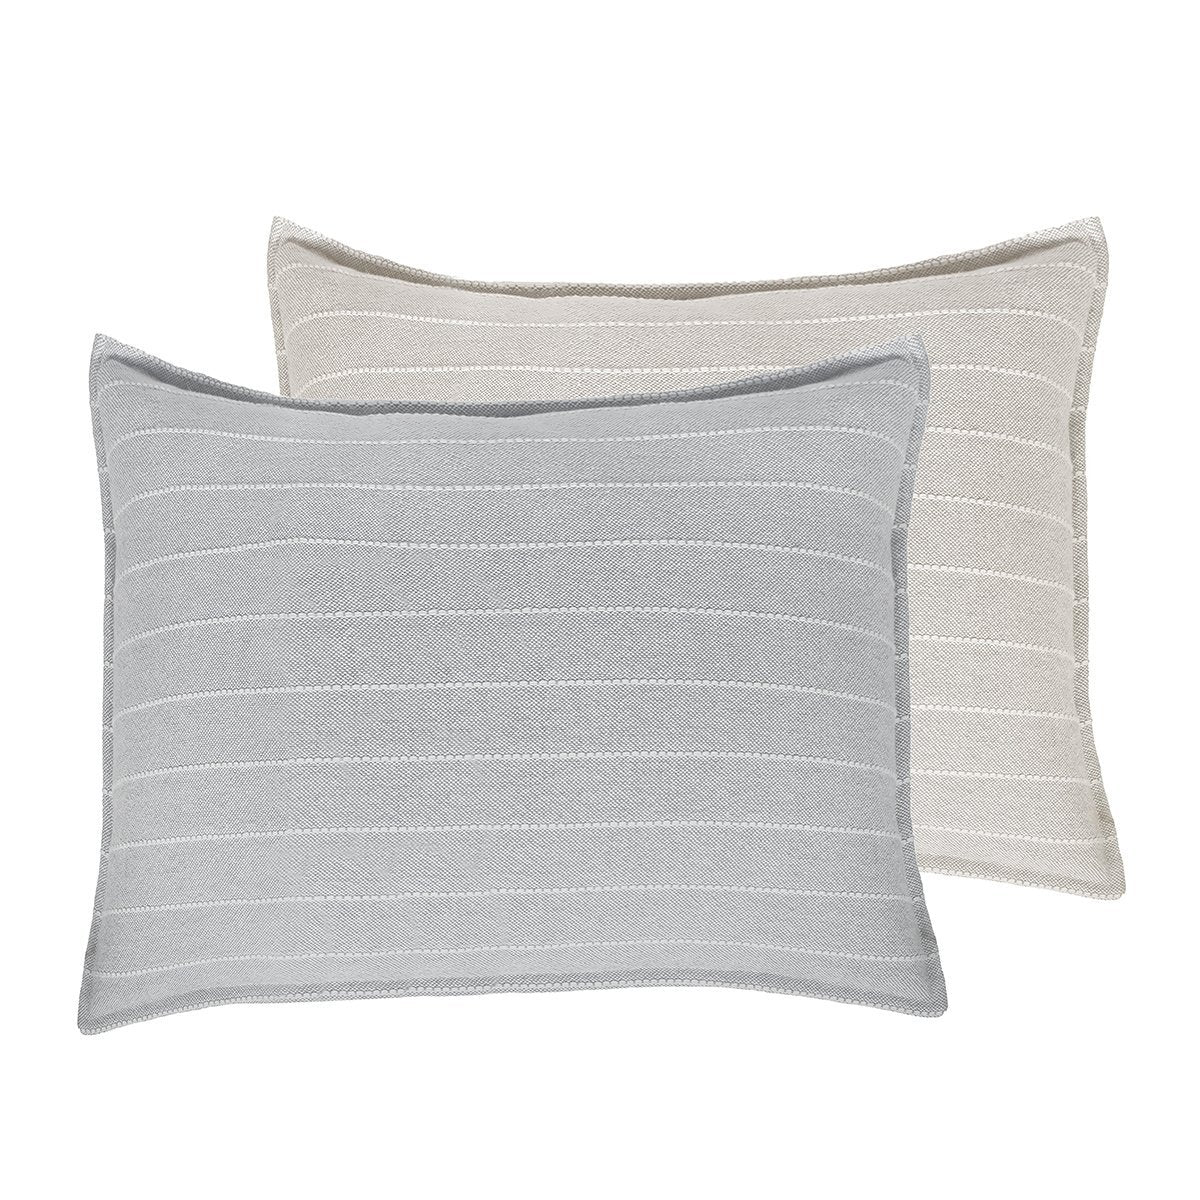 Henley Big Pillow by Pom at Home